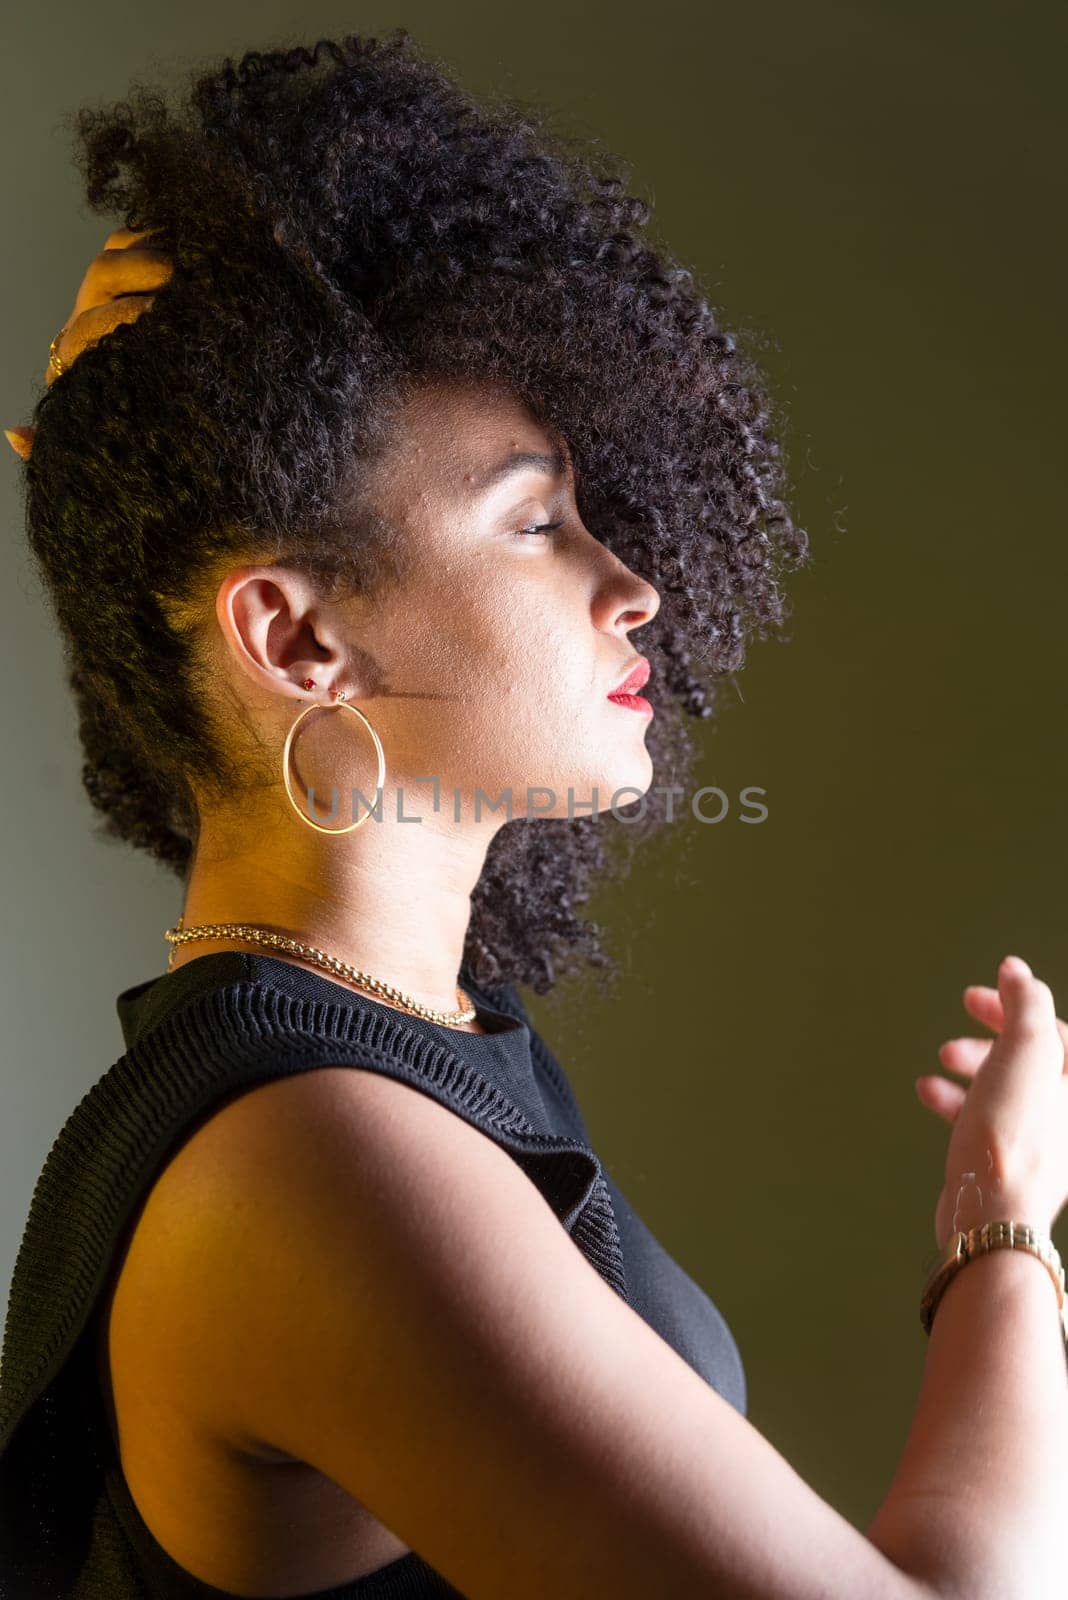 Beautiful young woman in profile wearing black clothing, with hair in her face. Studio portrait.